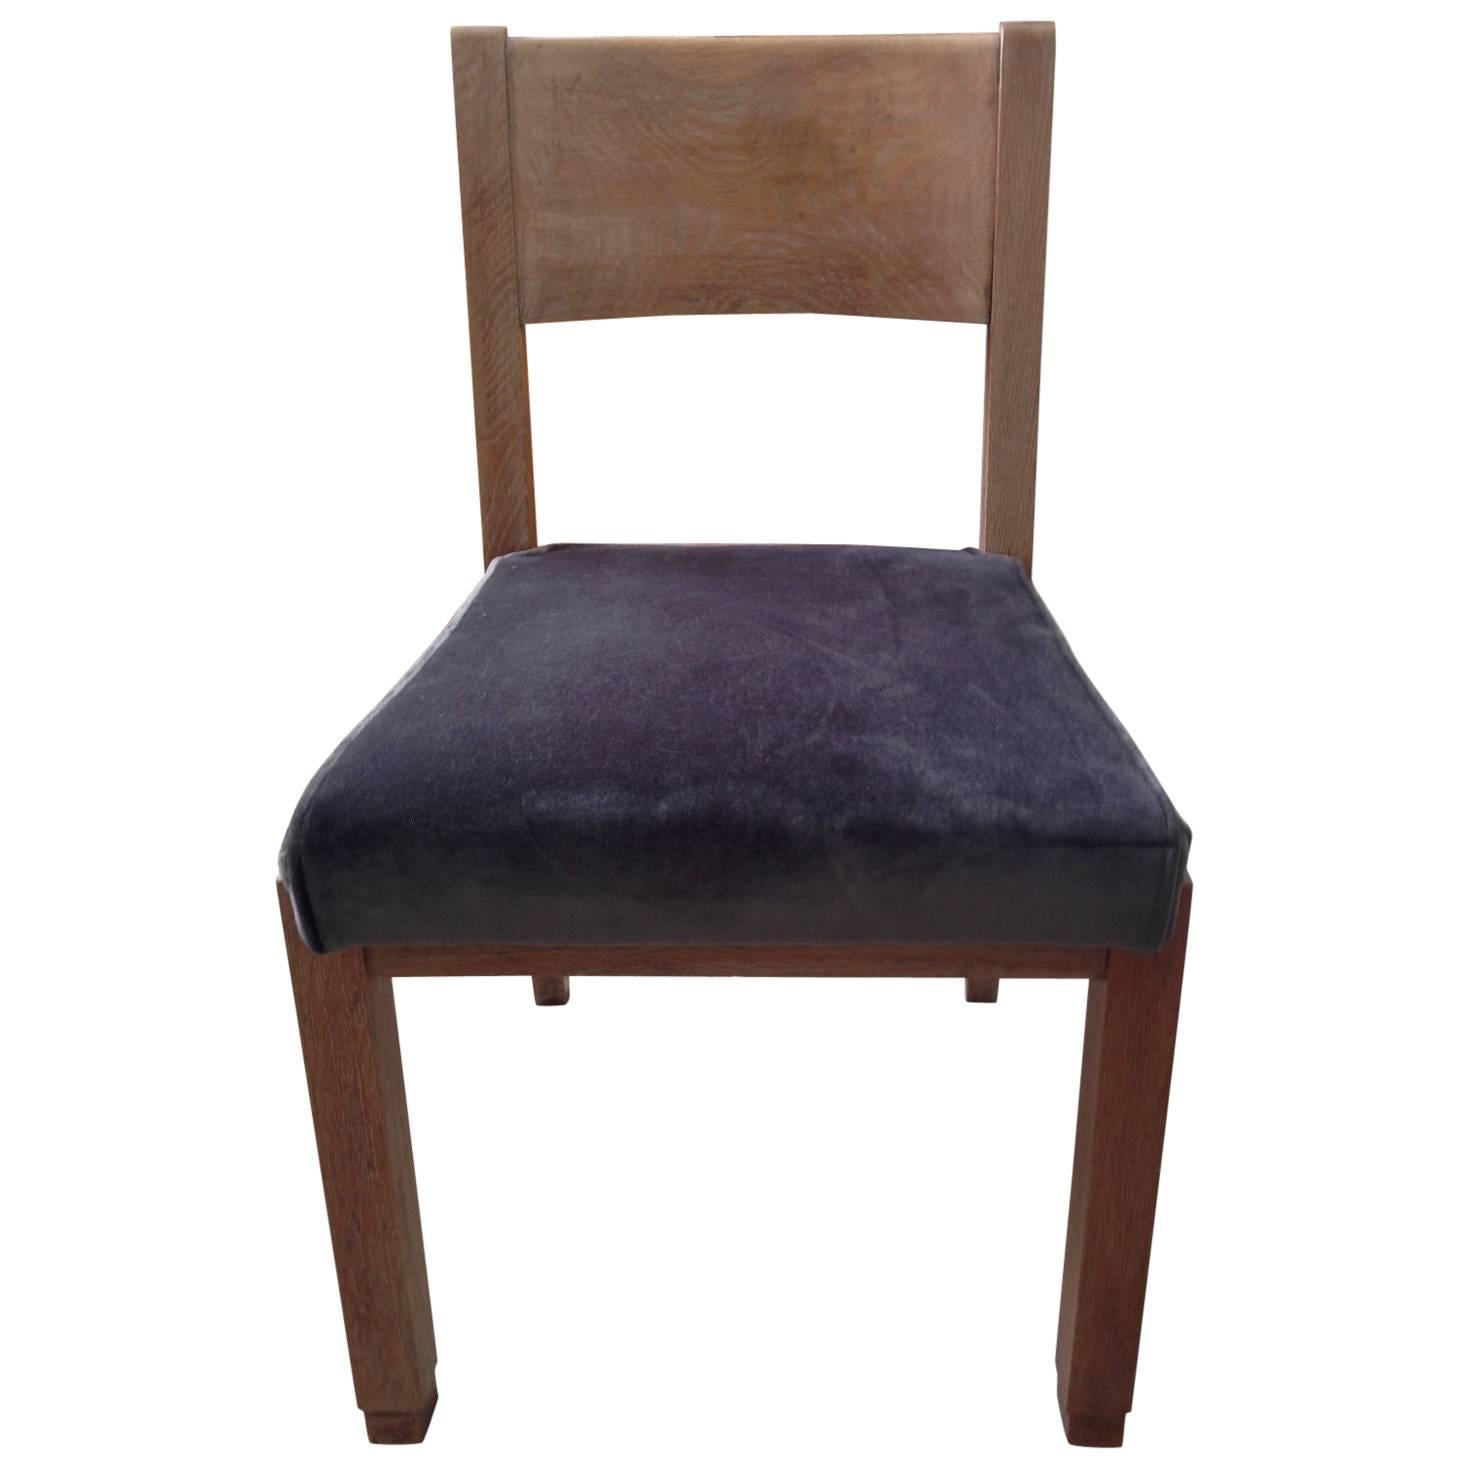 1940s French Limed Oak Chair in the Style of Pierre Chareau Re-Upholstered For Sale